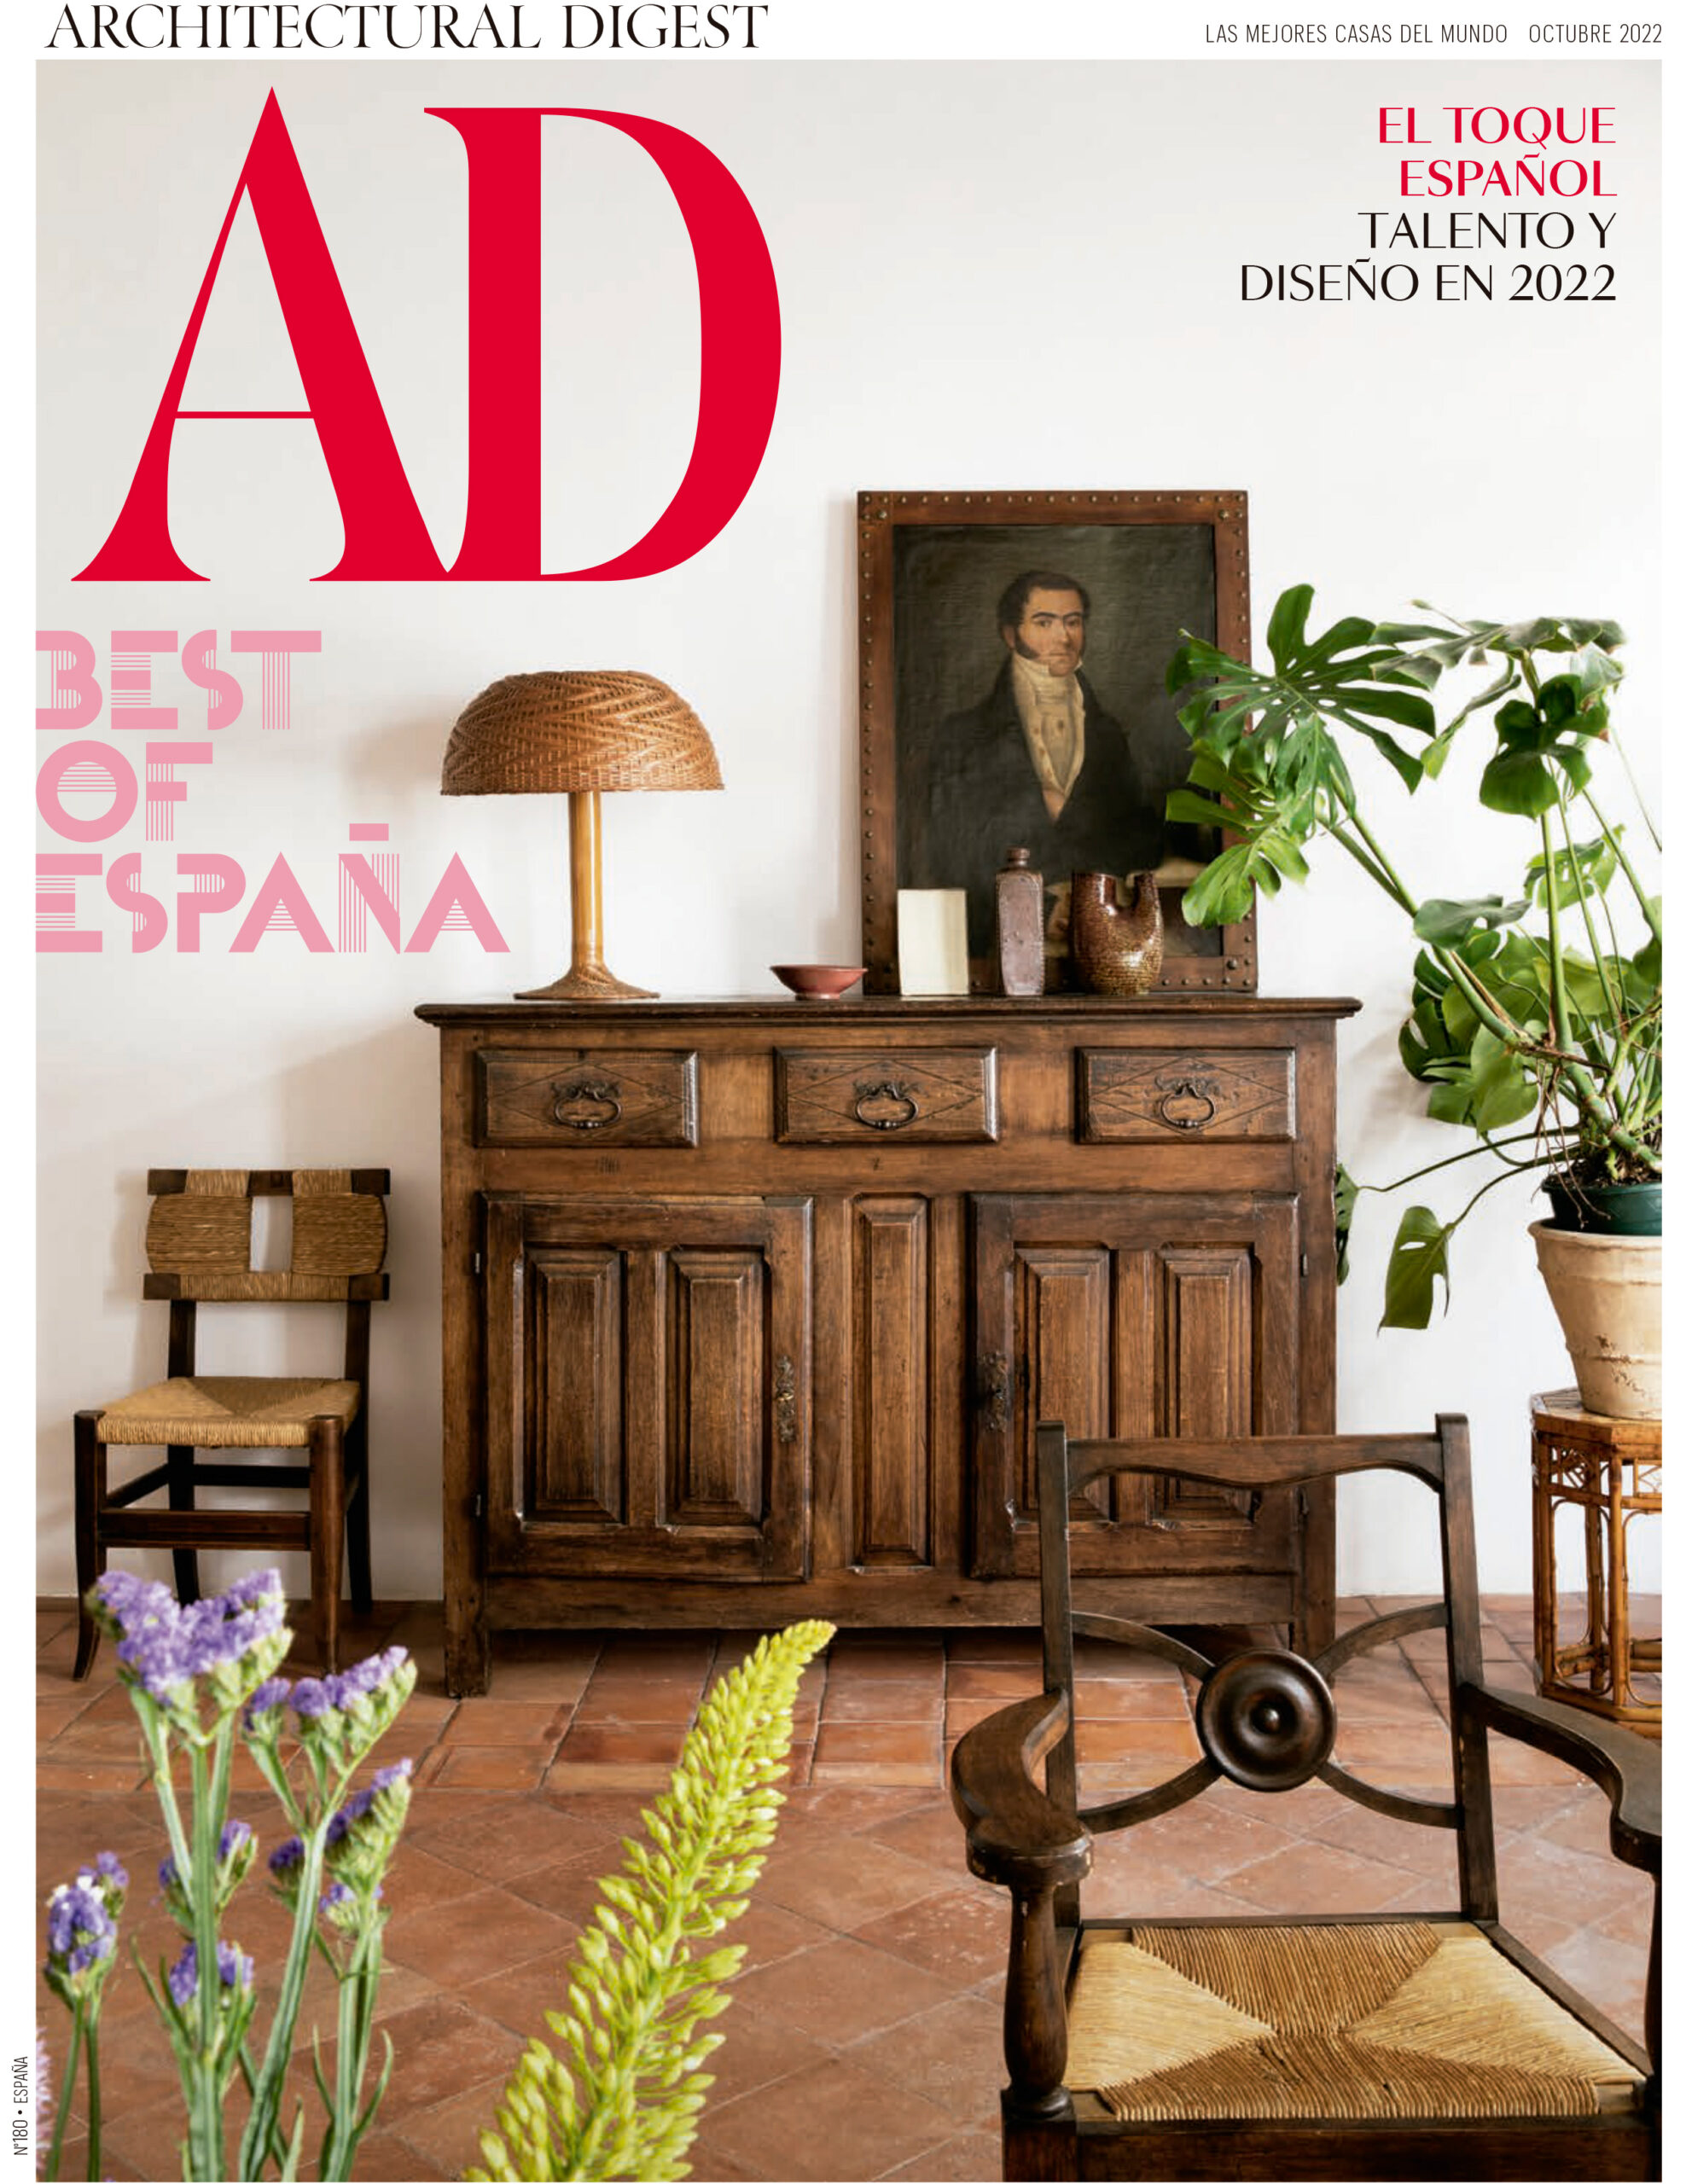 Let's Pause named Best of Spain 2022 by Architectural Digest